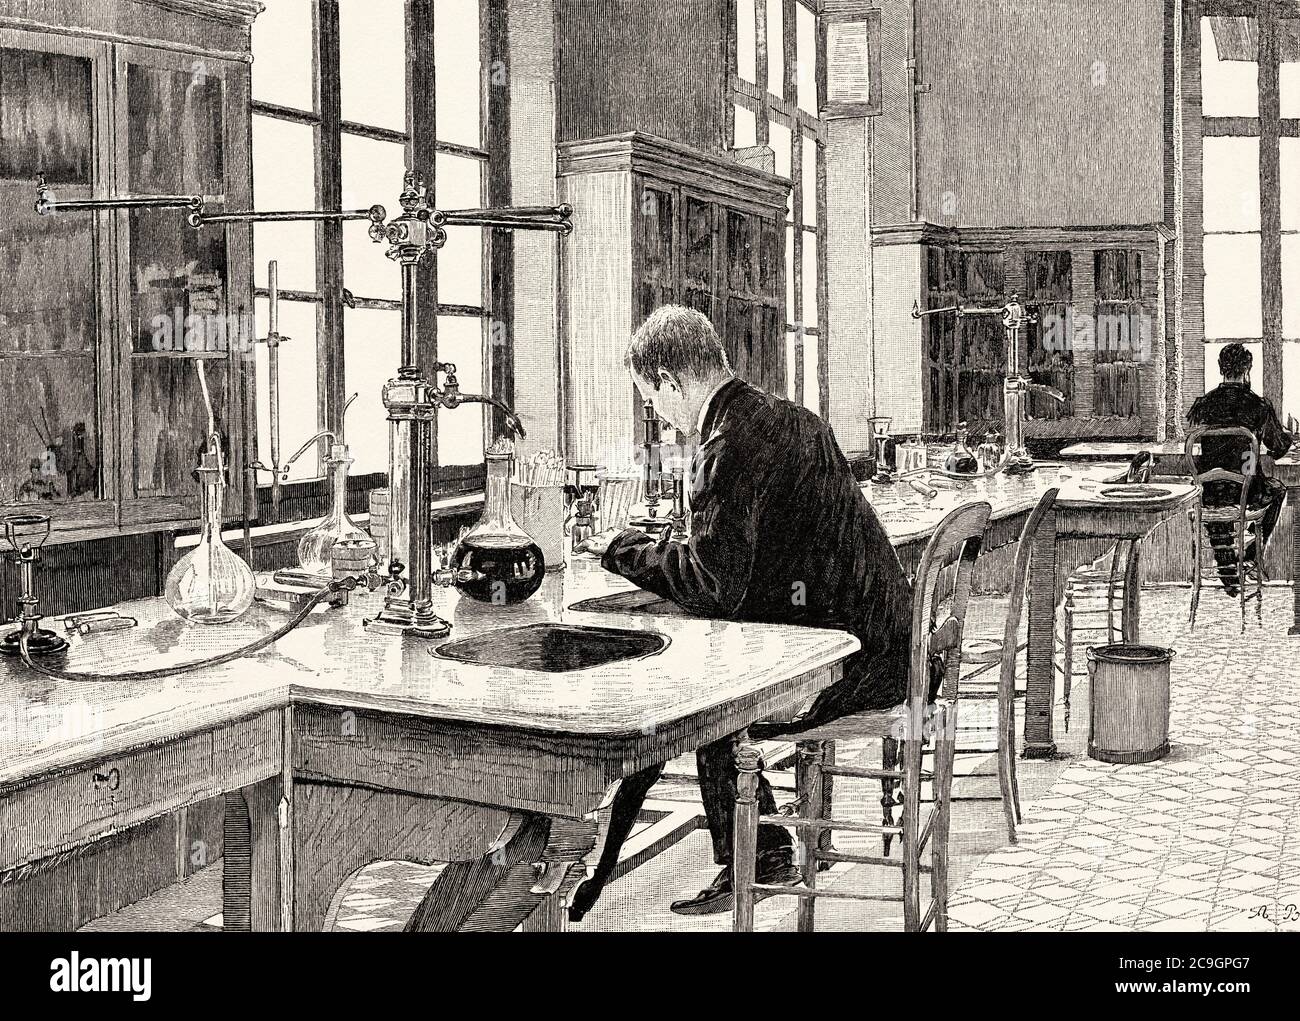 The Pasteur Institute. Microbiology laboratory study and cultivation of microbes 1890 Paris, France. Old XIX century engraved illustration from La Ilustracion Española y Americana 1890 Stock Photo